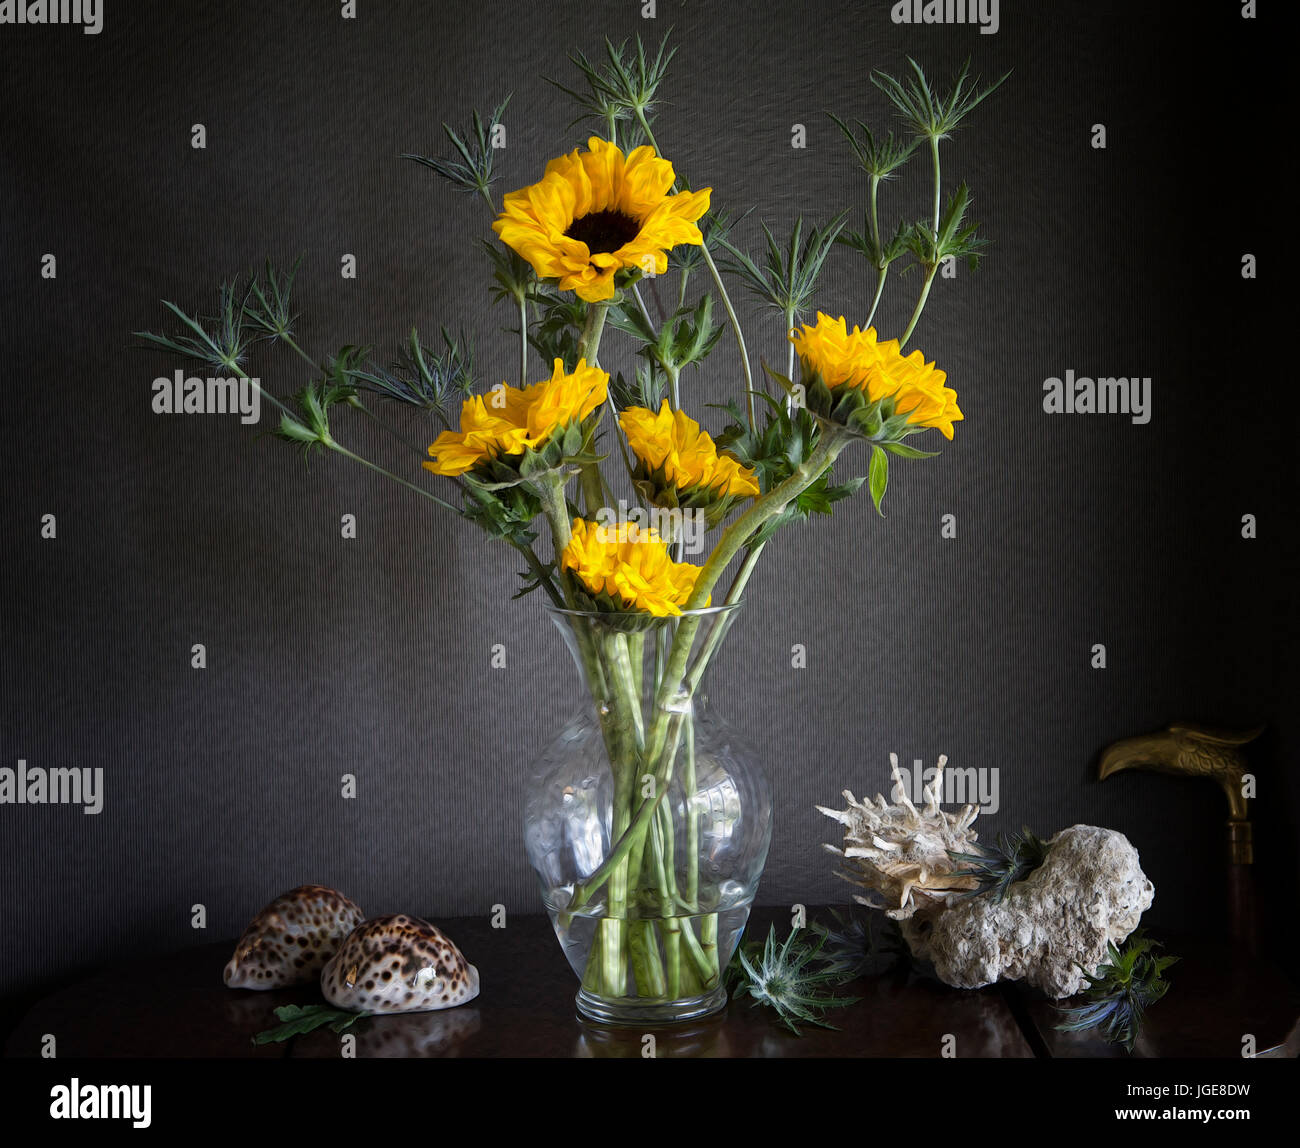 A Still Life arrangement of yellow sunflowers with tiger cowries and spondylus with painterly effects and dark patterned background in natural light Stock Photo